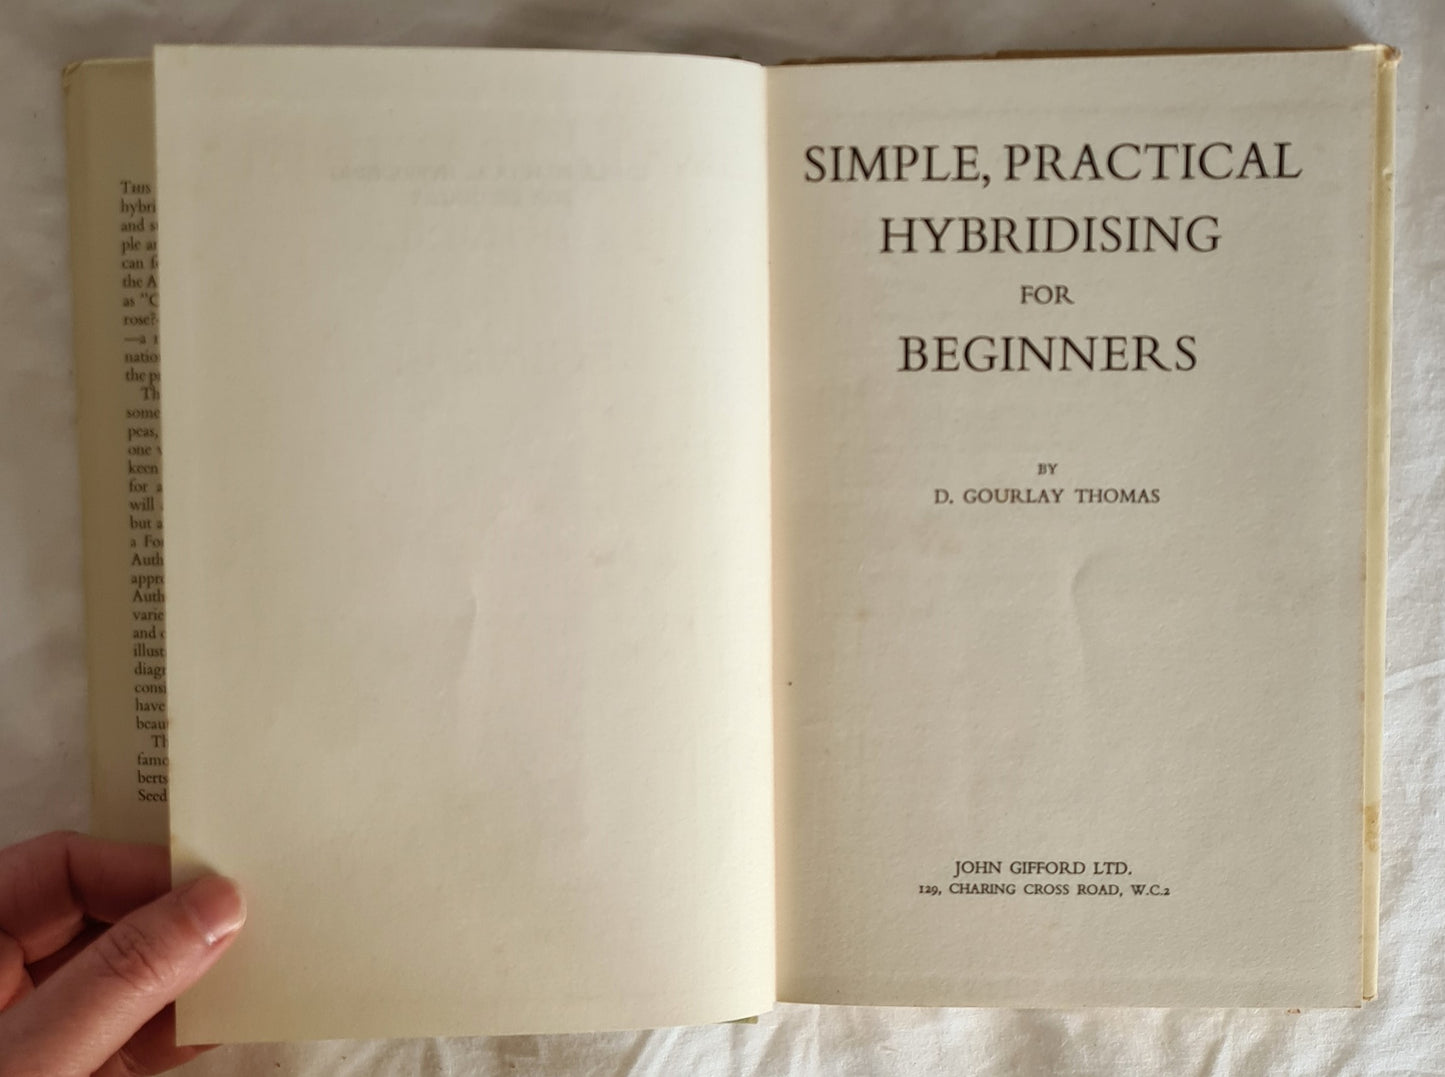 Simple, Practical Hybridising for Beginners by D. Gourlay Thomas